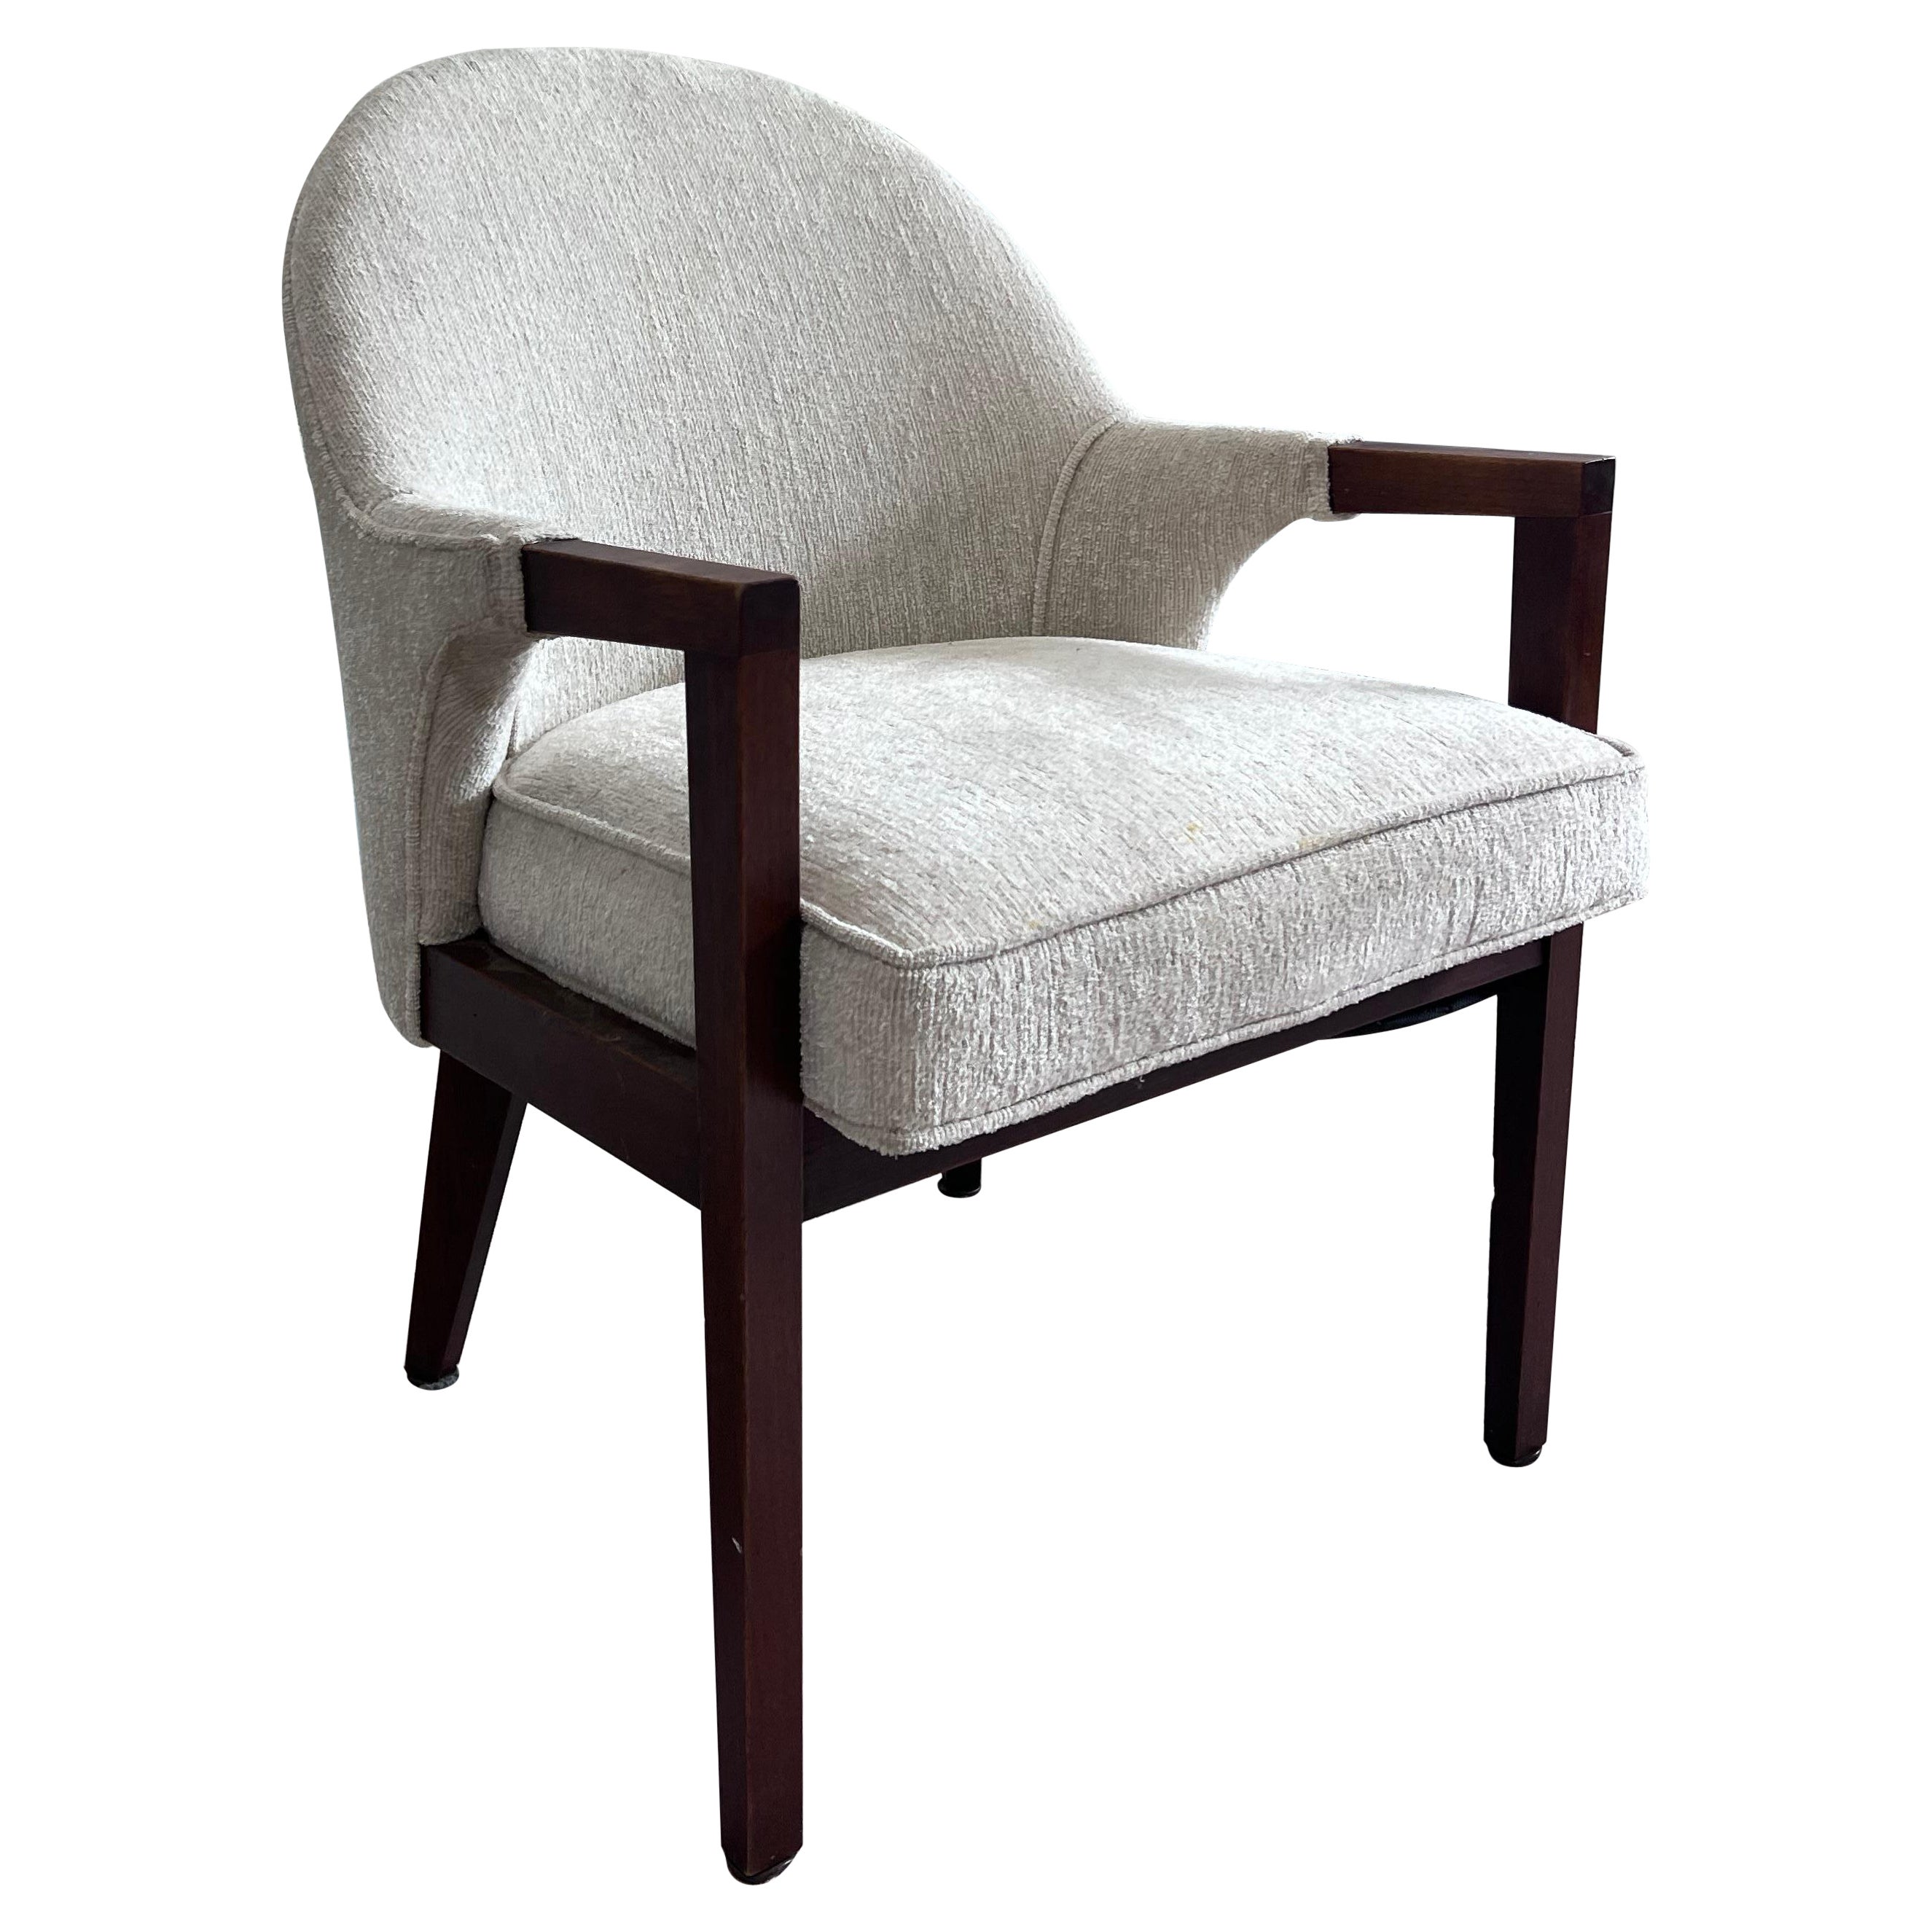 Adrian Pearsall style 1960s Walnut and Ivory fabric lounge chair For Sale